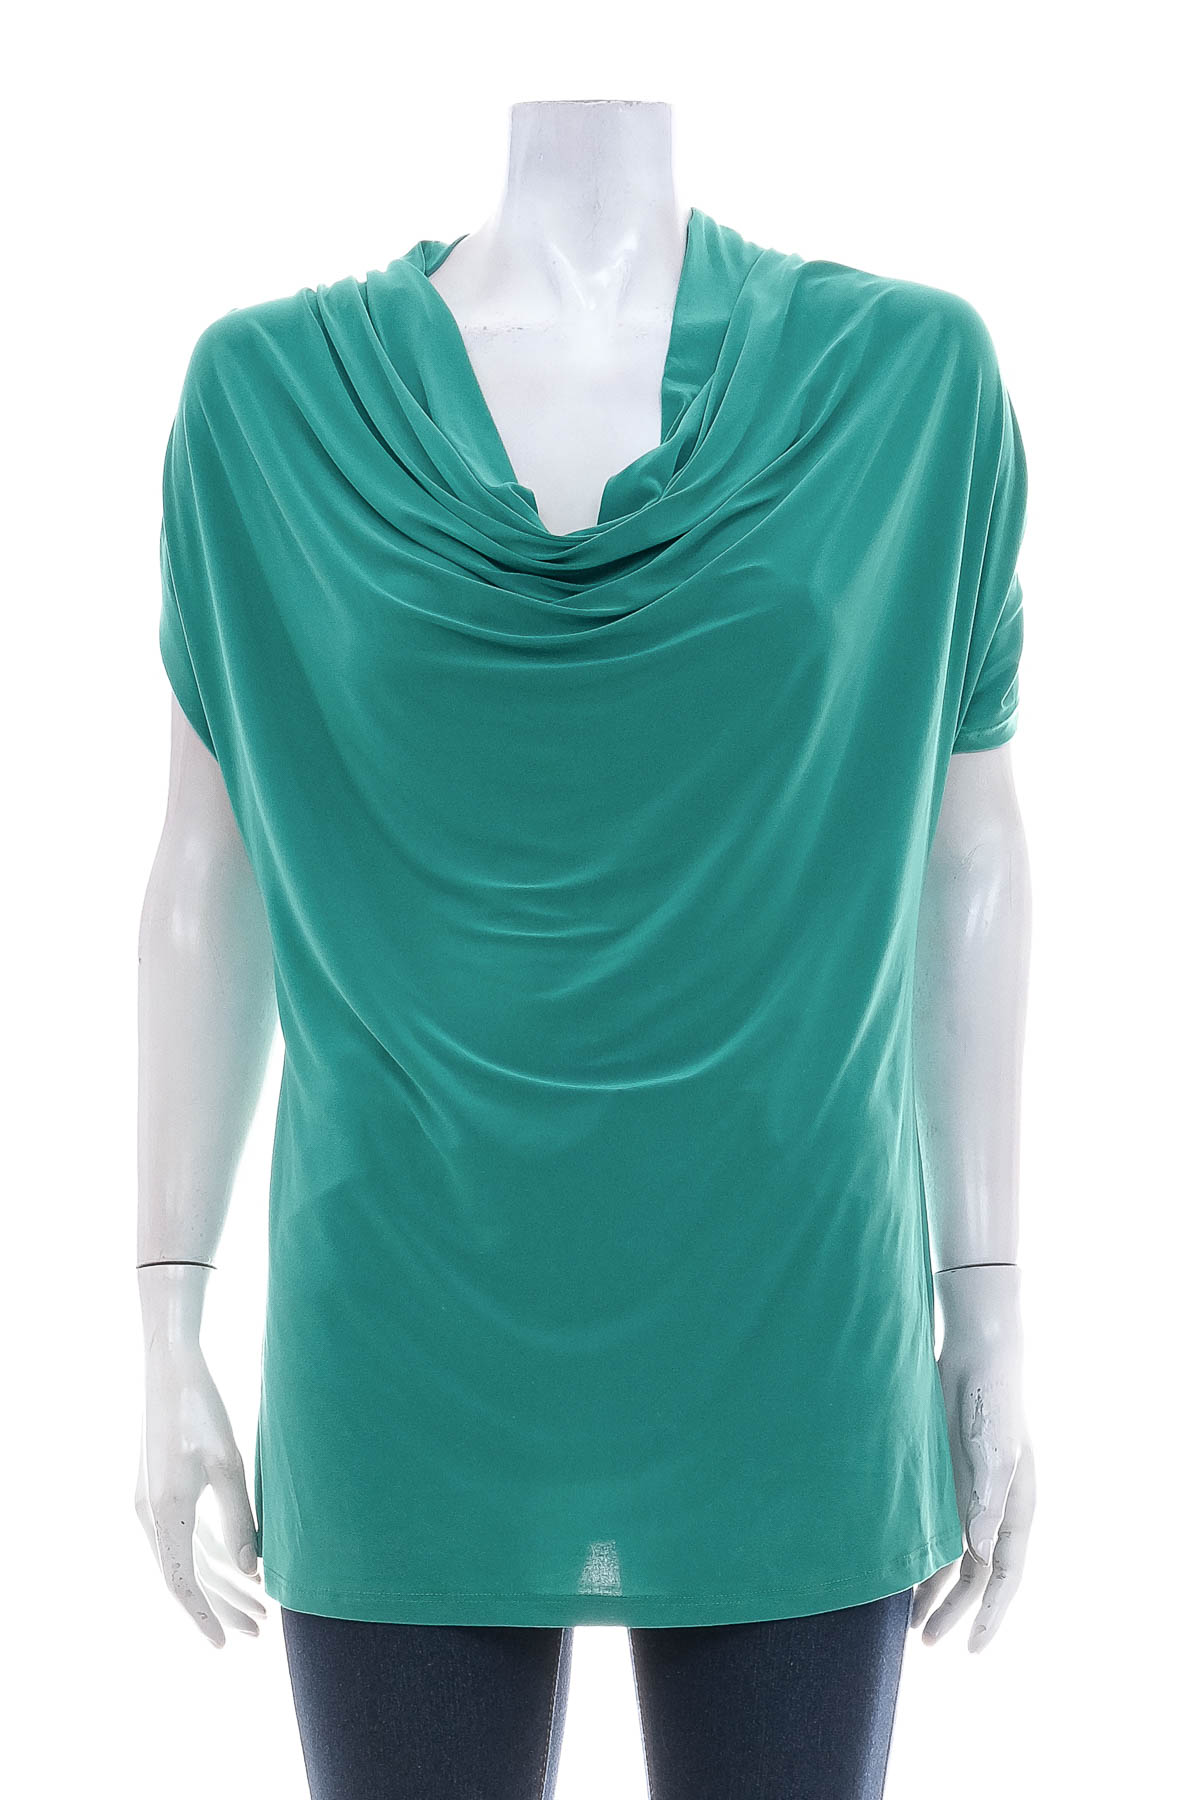 Women's t-shirt - Made in Italy - 0